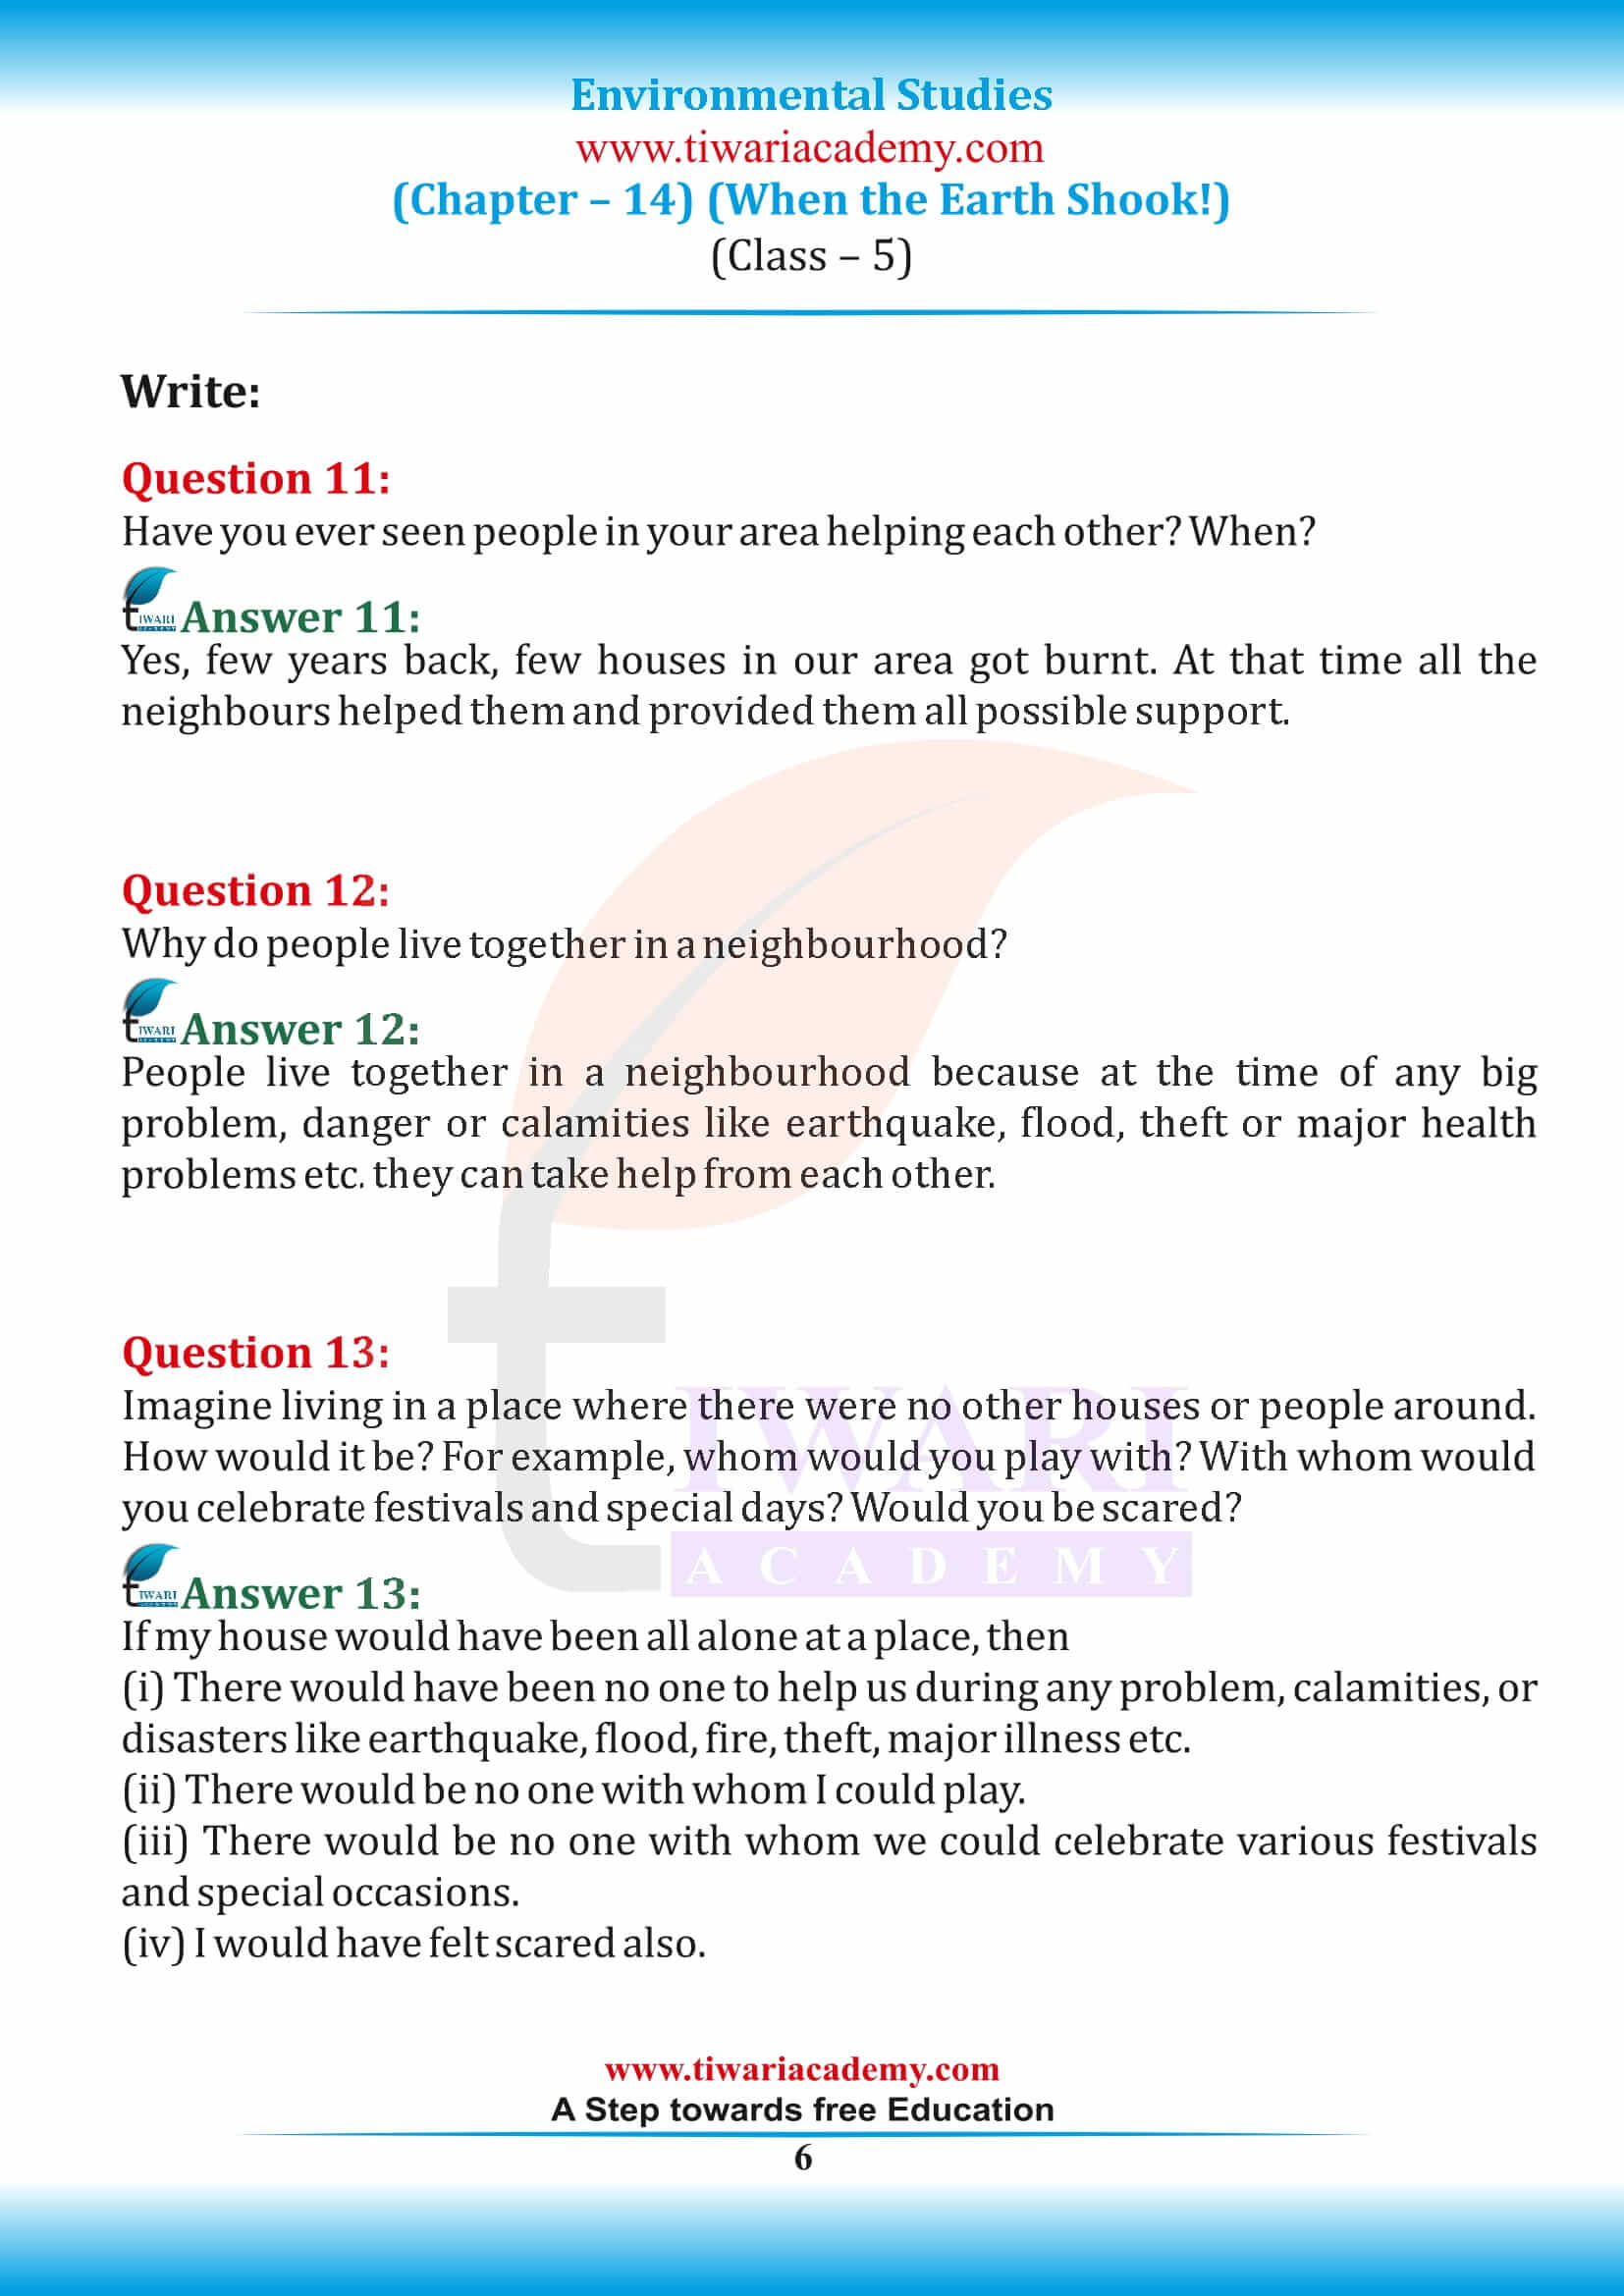 NCERT Solutions for Class 5 EVS Chapter 14 question answers